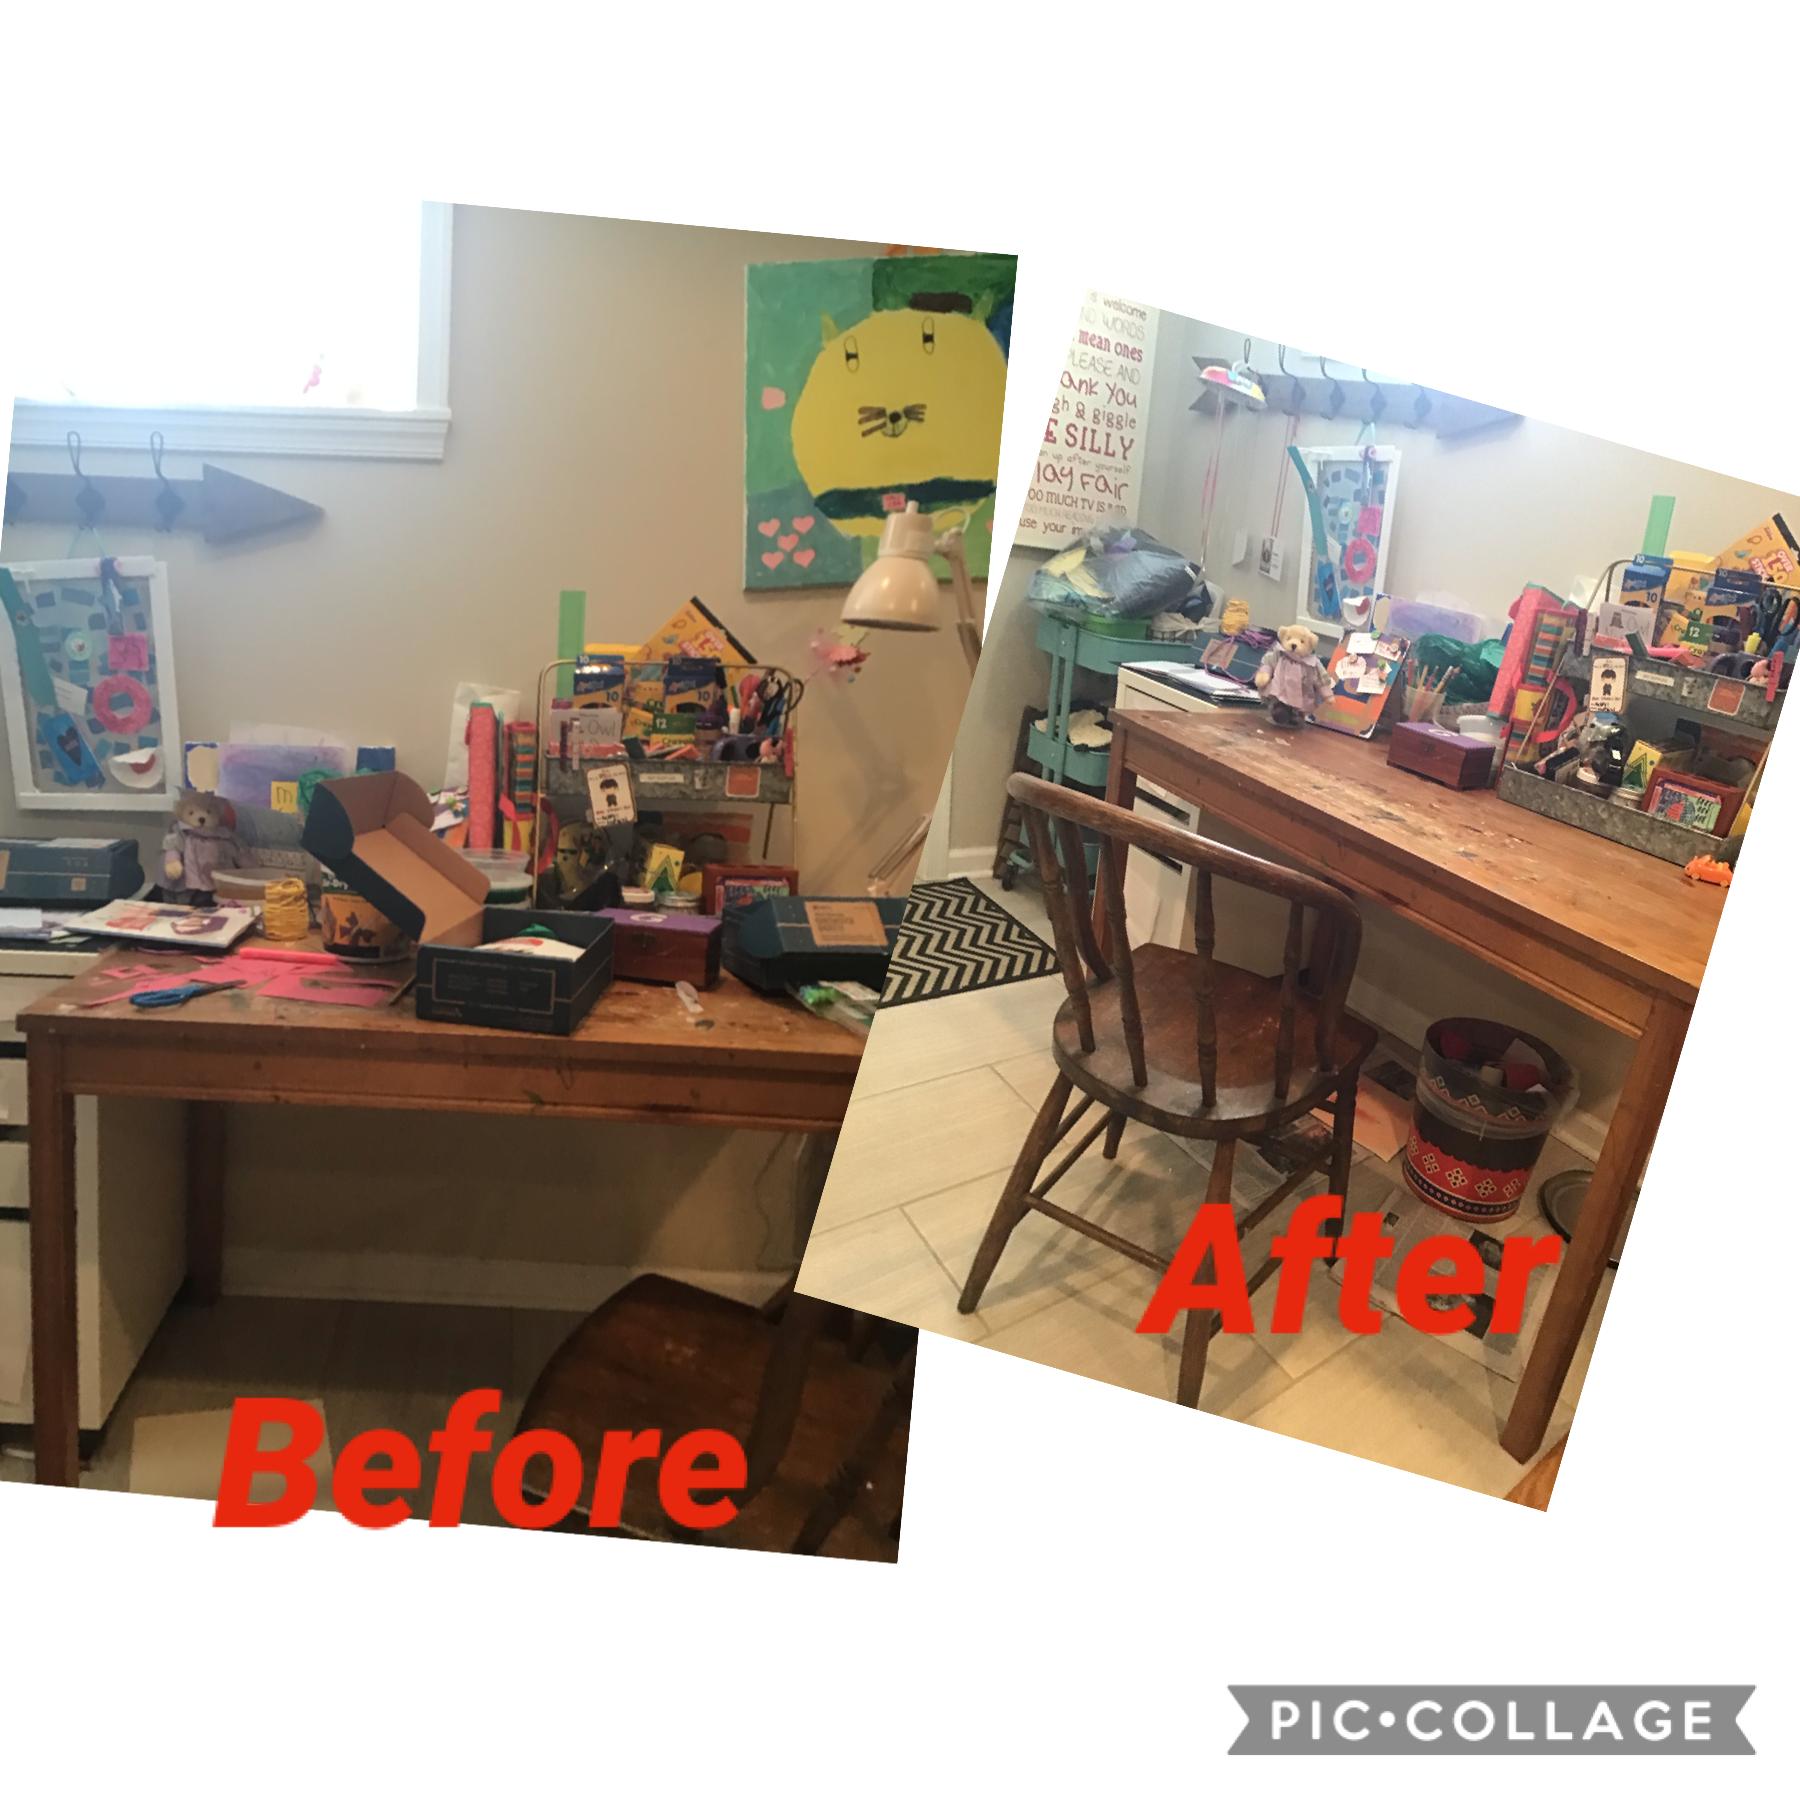 Cleaning Georgia’s art table. Before and after. Wow!